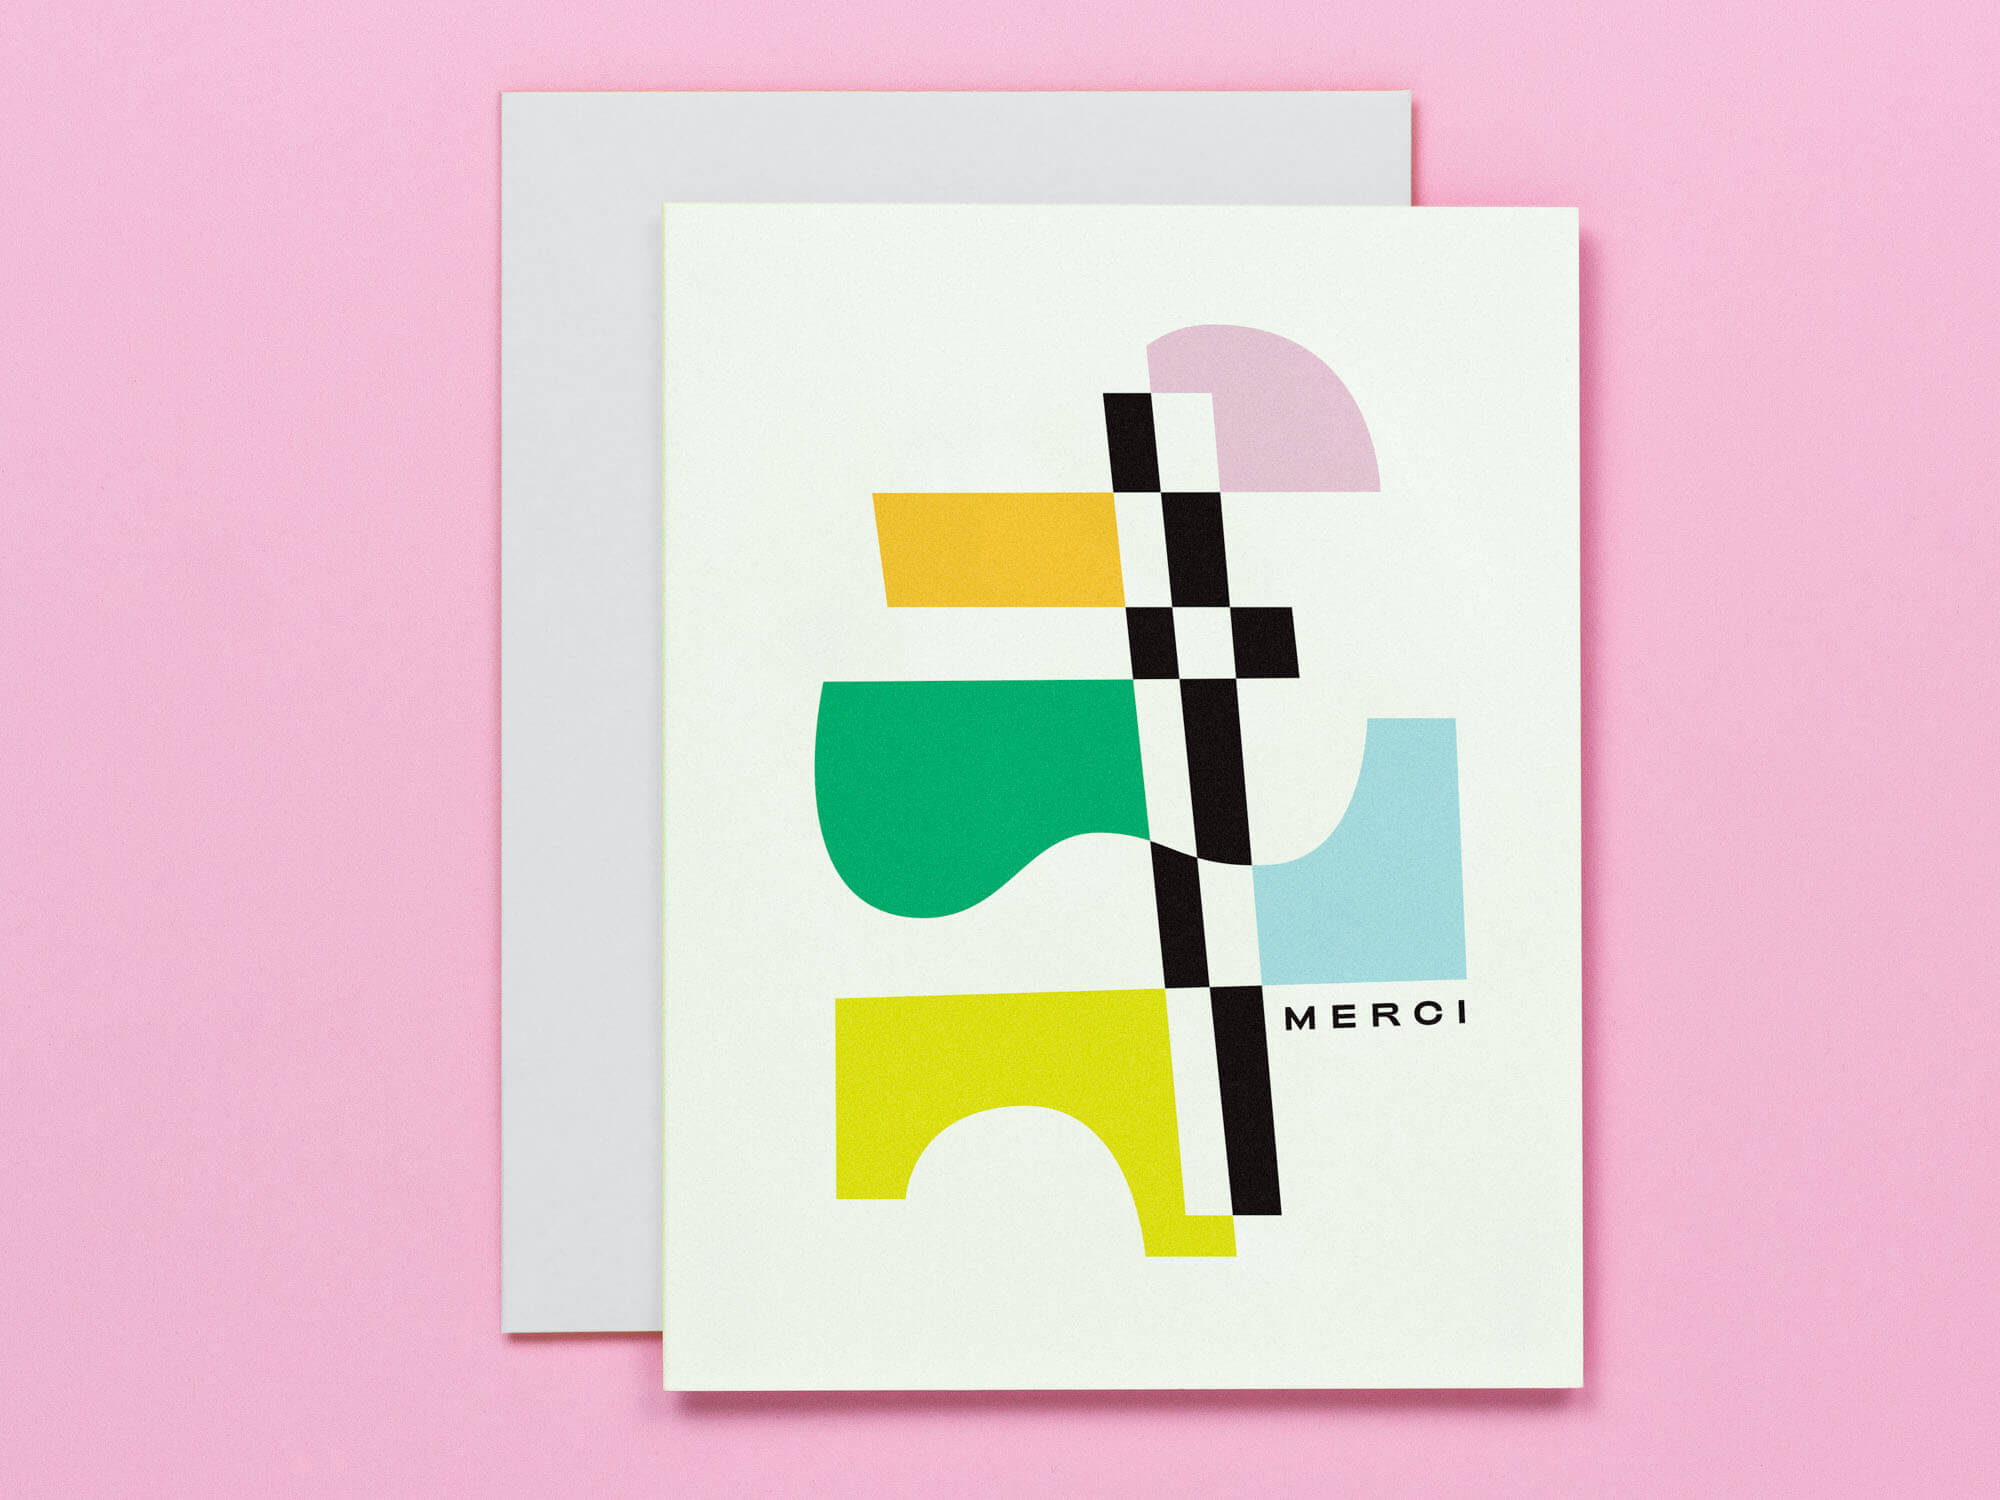 Merci French thank you card designed with minimal abstract shapes composition in pastel hues with black and white accents. Vaguely Kandinsky and art deco-inspired. Made in USA by My Darlin' @mydarlin_bk